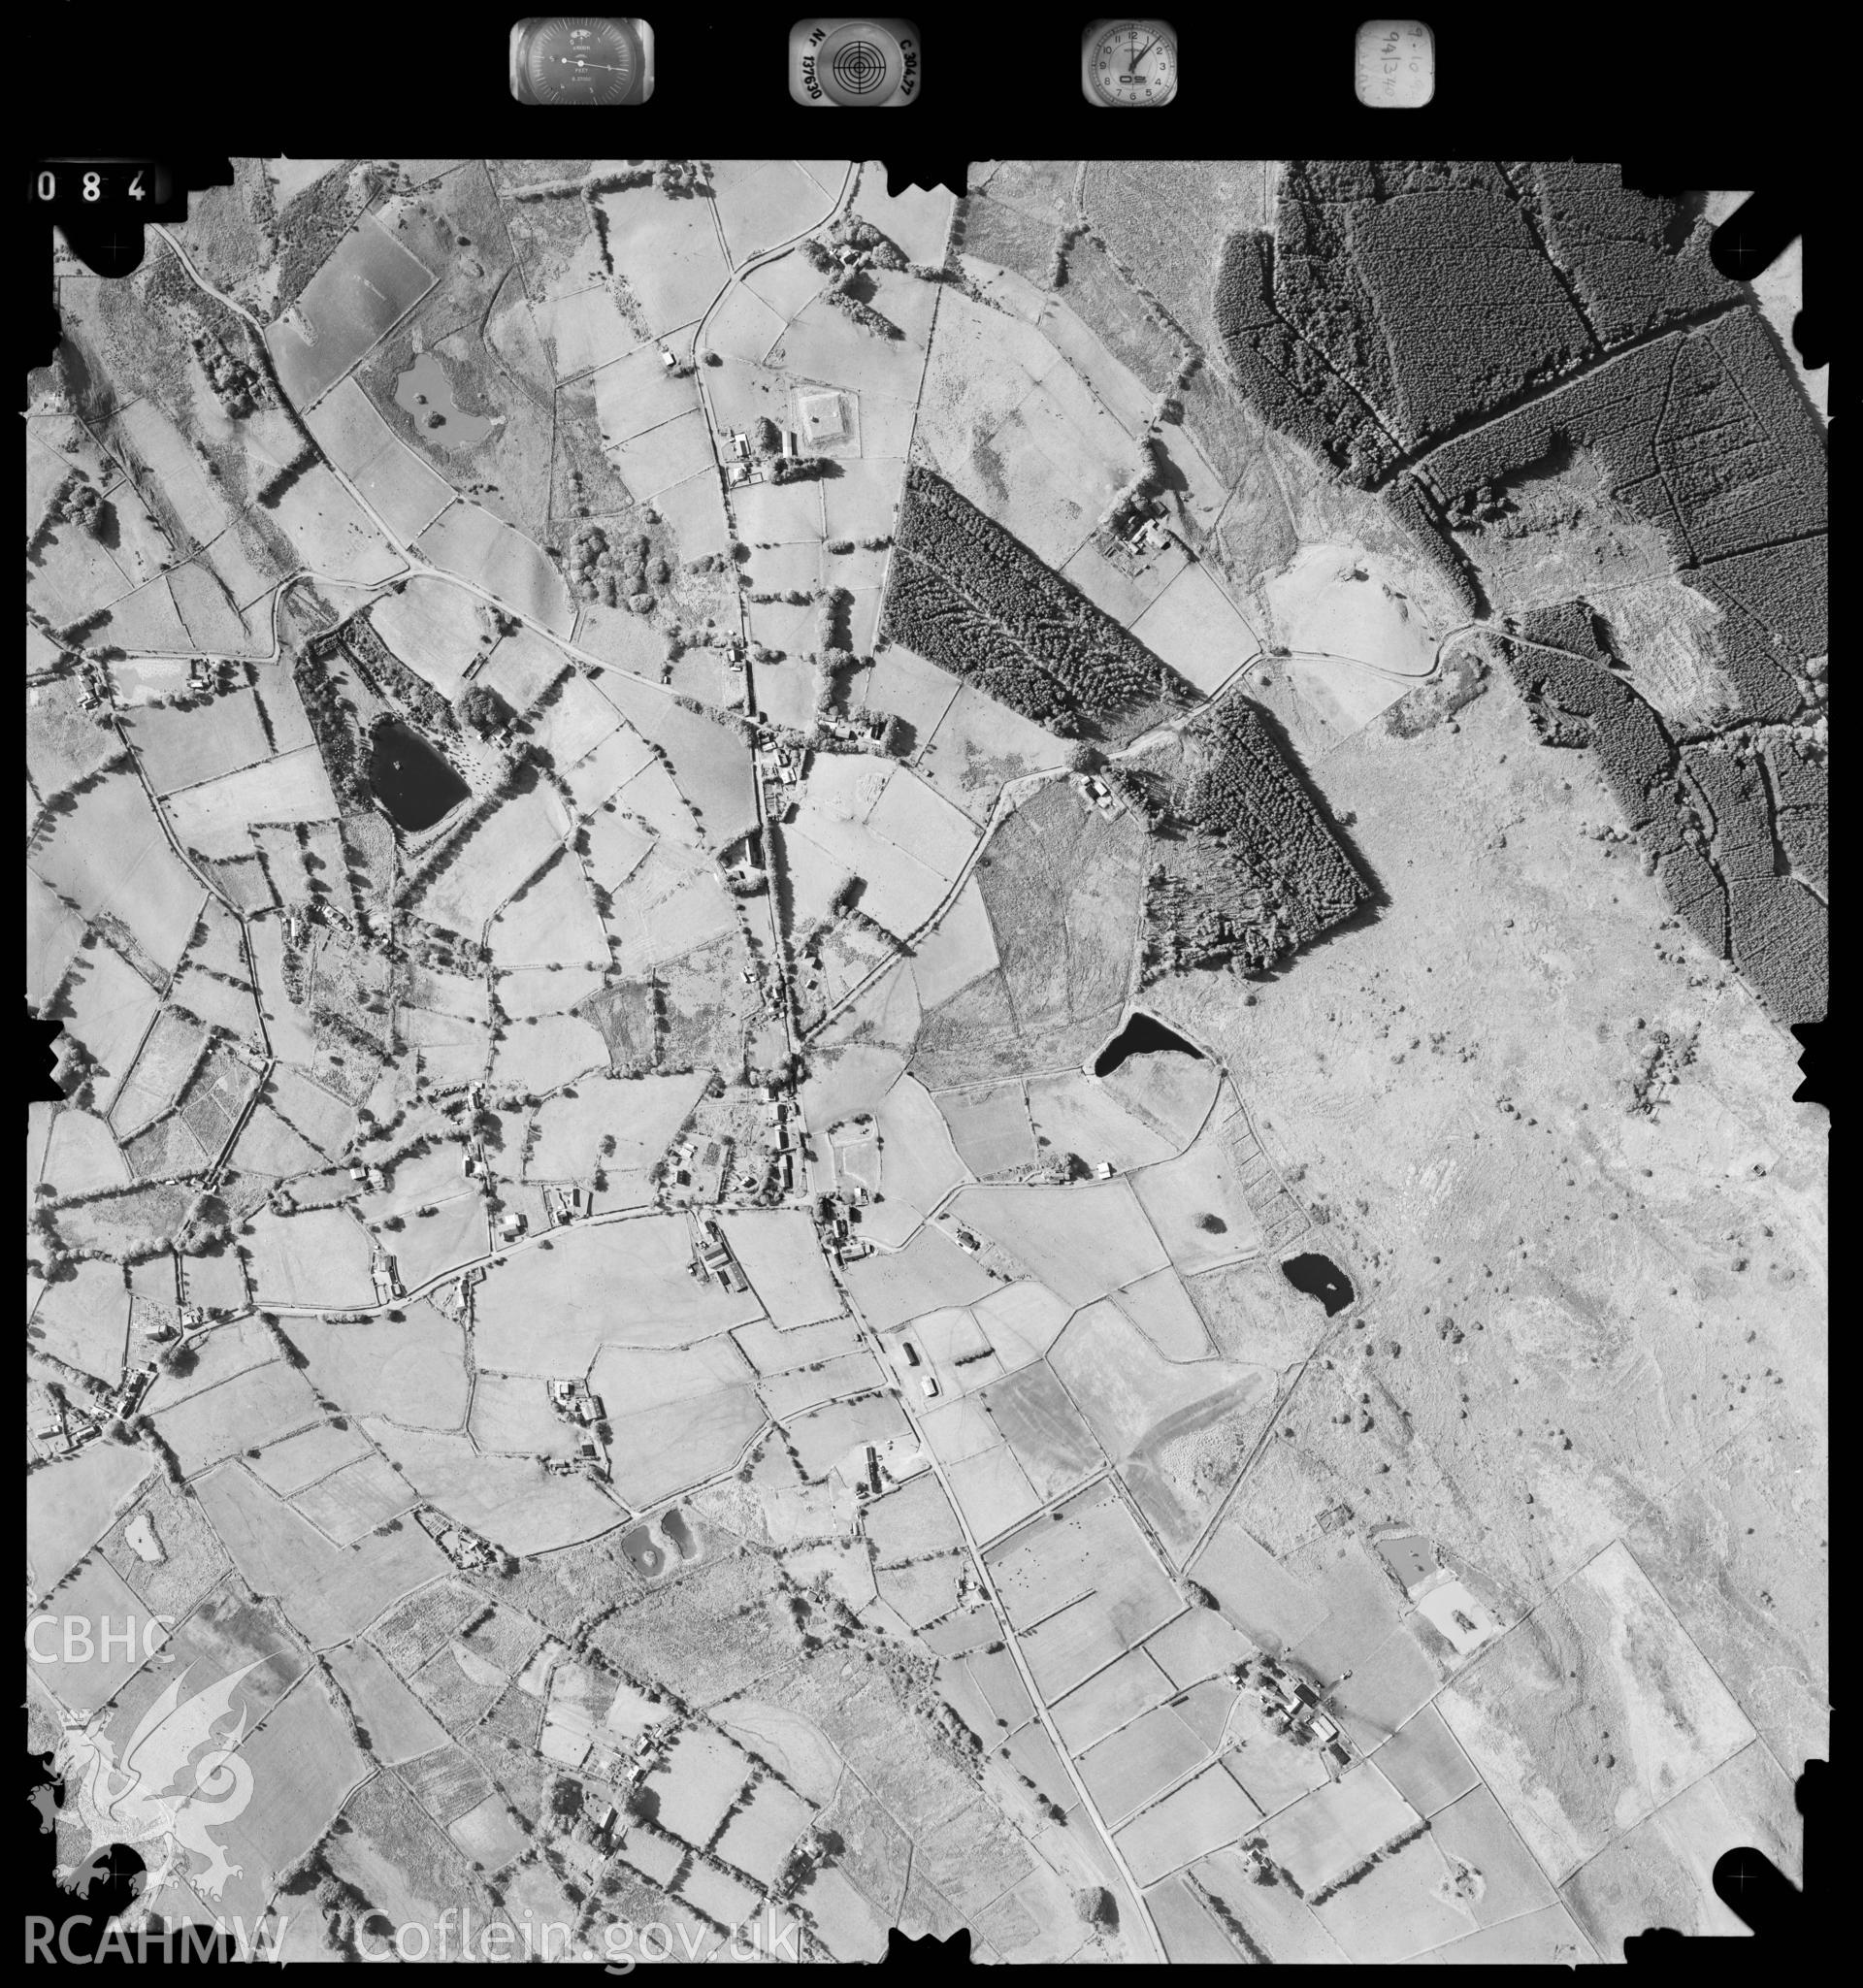 Digitized copy of an aerial photograph showing Penuwch area, Ceredigion, taken by Ordnance Survey, 1994.